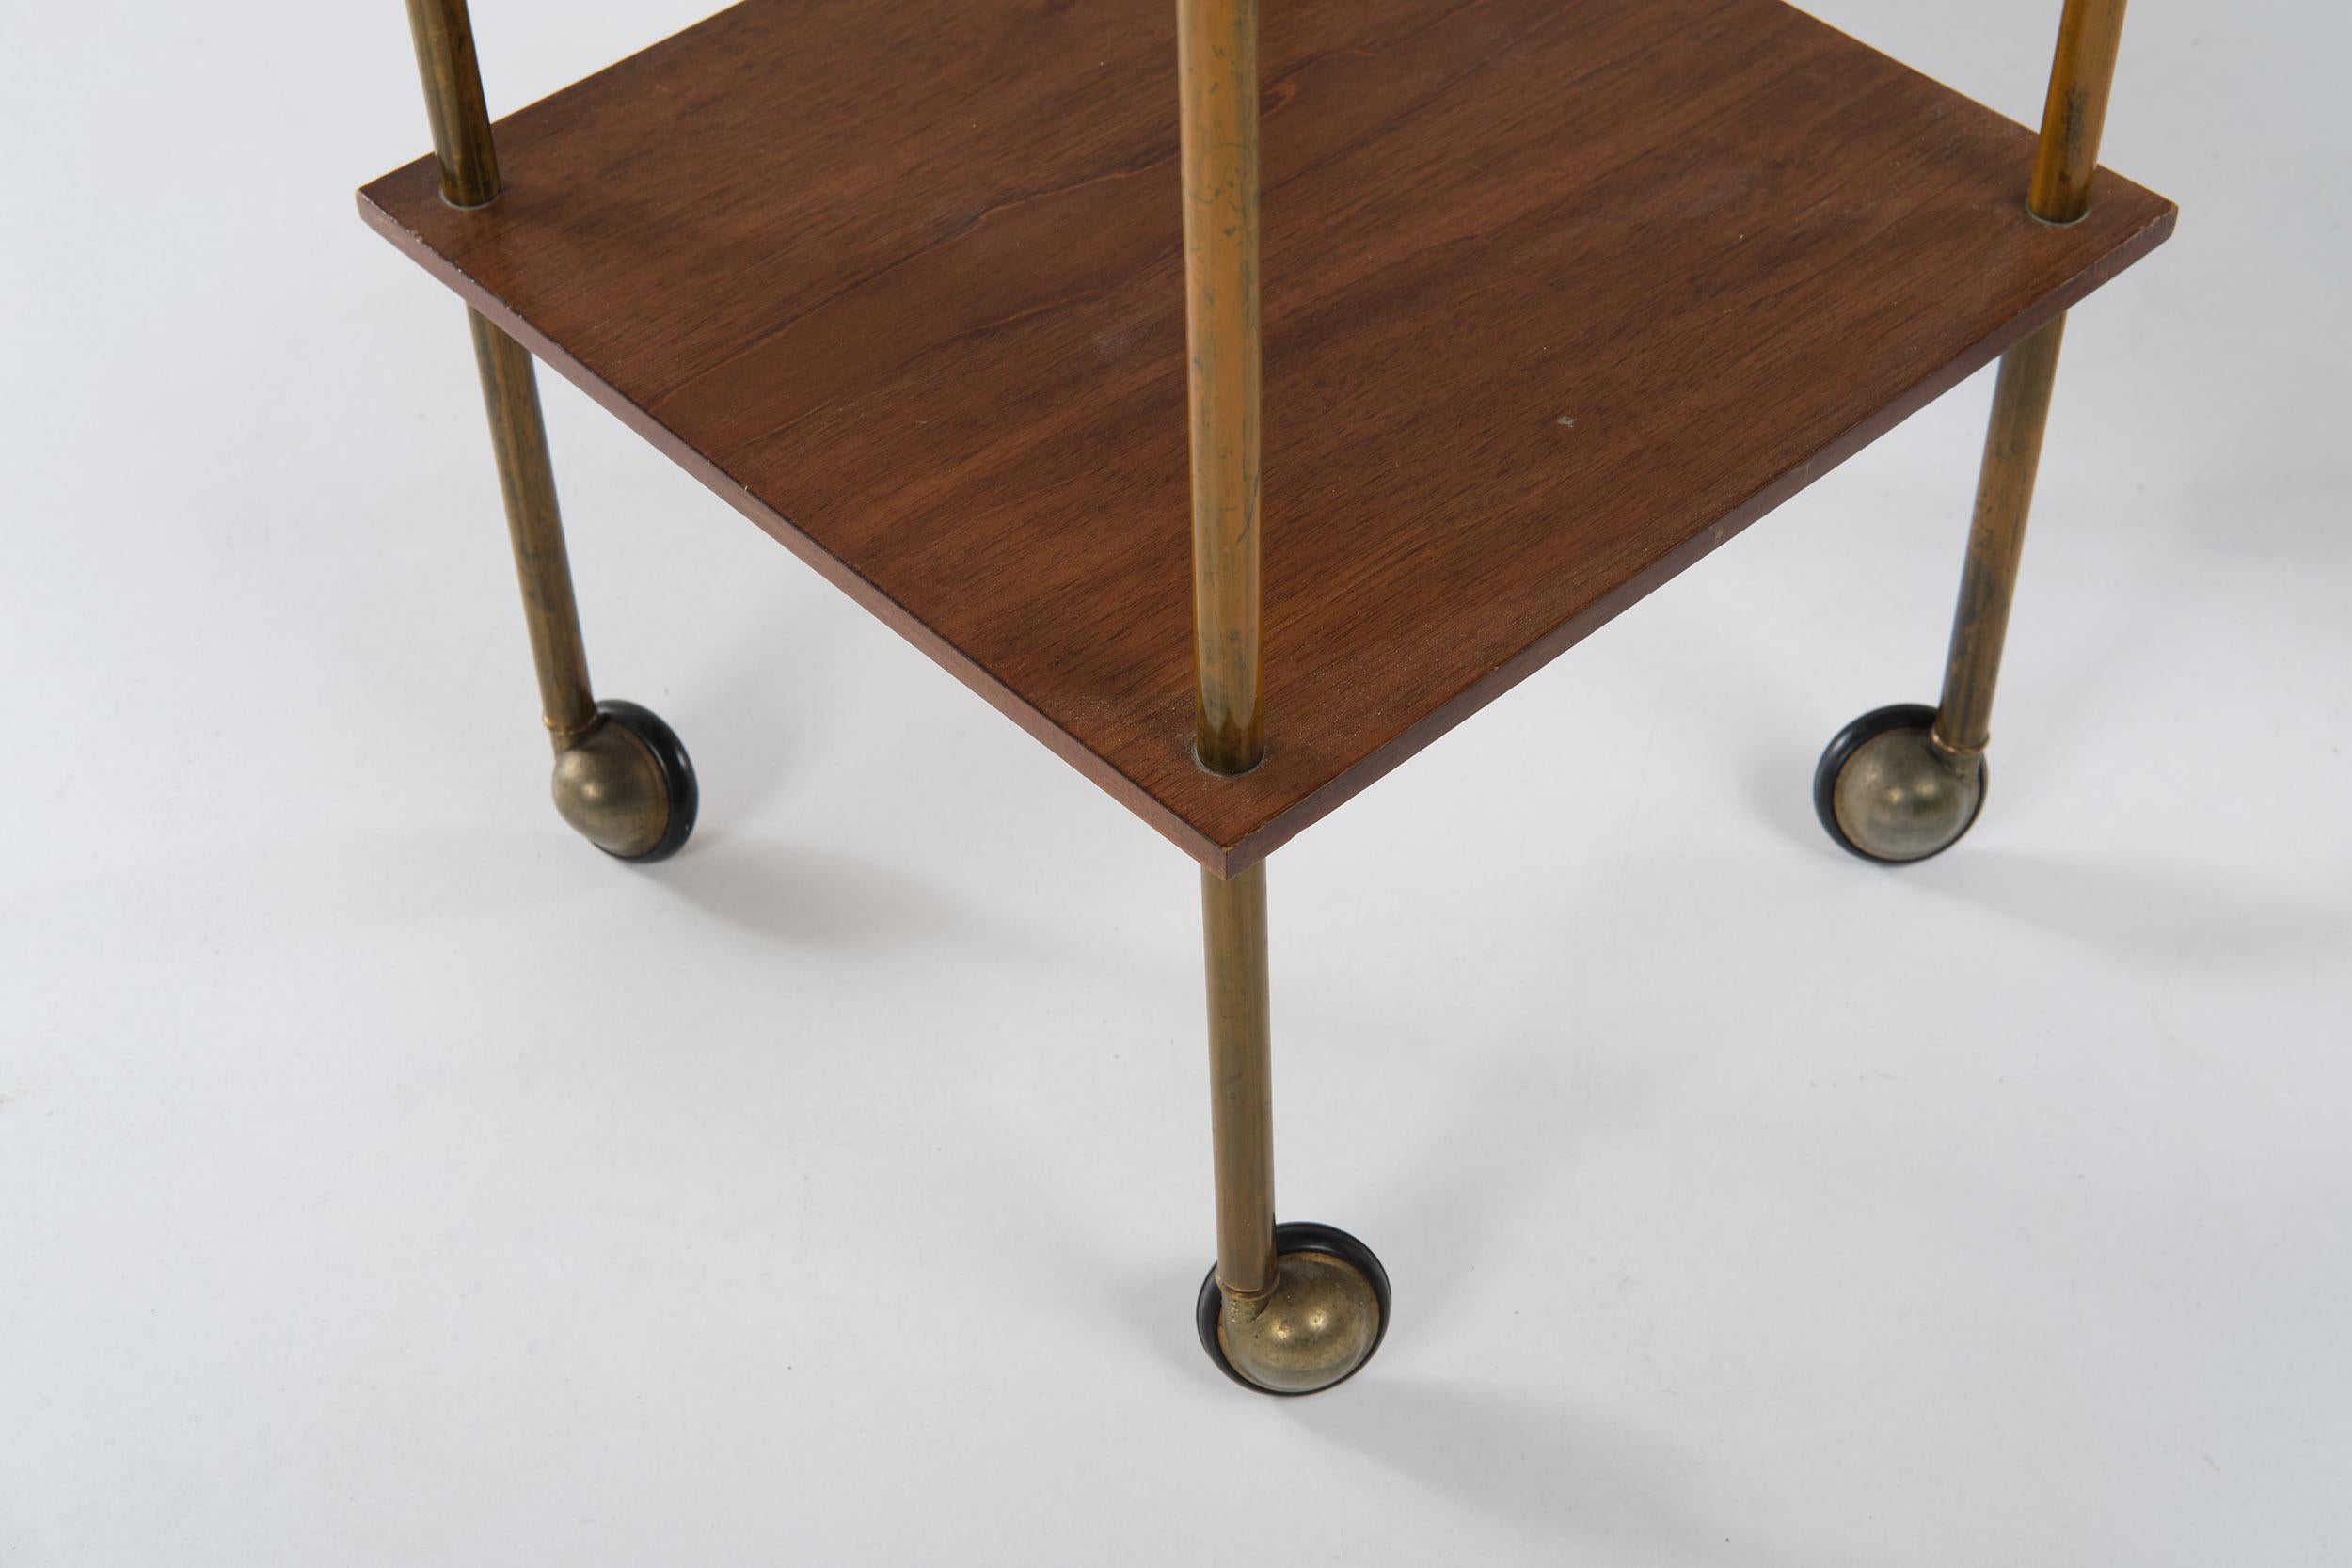 Italian Pair of Side Tables Model T9 in wood and brass by Luigi Caccia Dominioni, 1950s